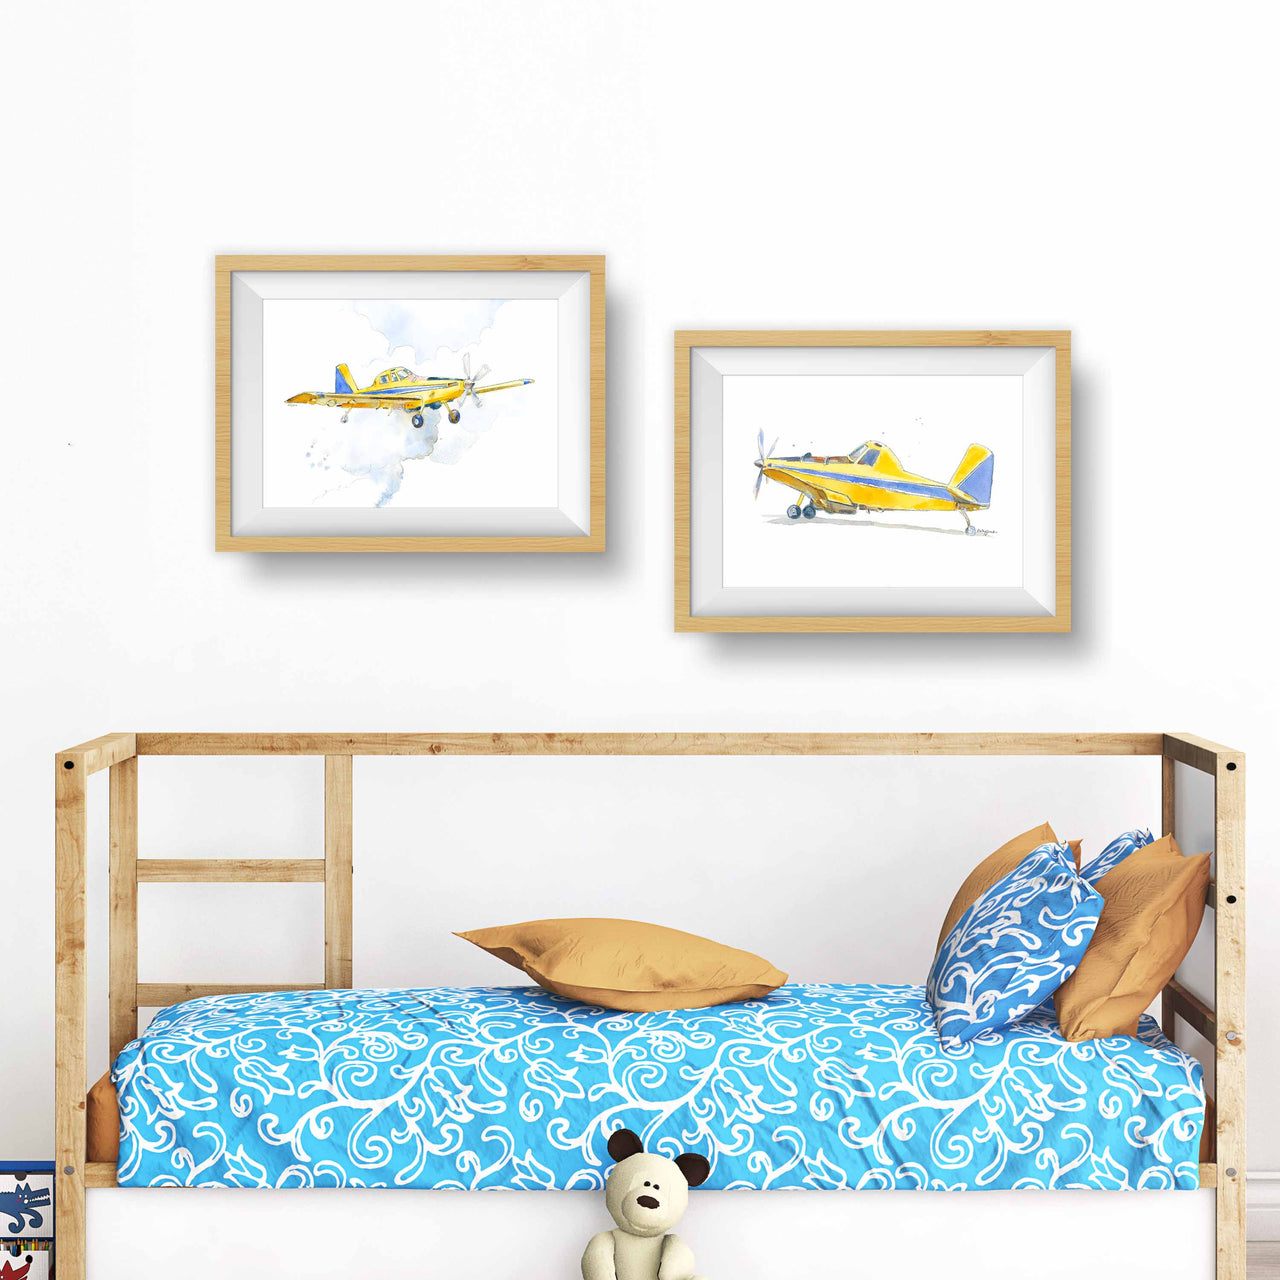 Yellow Air Tractor Print